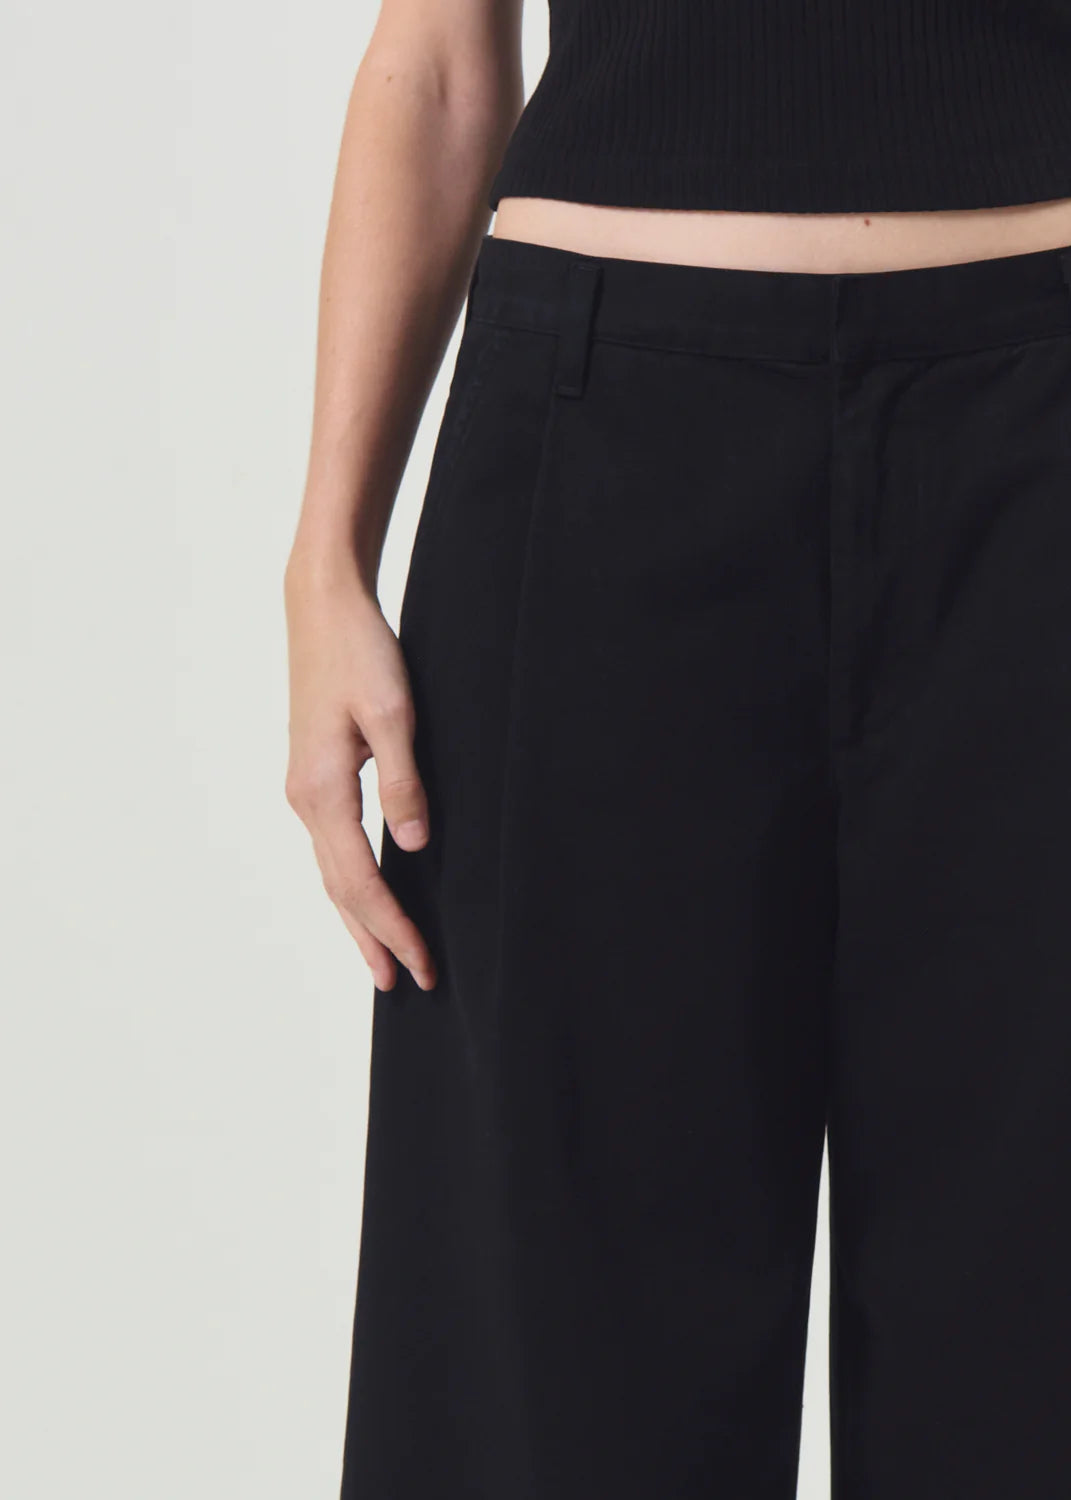 Agolde black Daryl wide leg trouser pant low-slung silhouette | Pipe and Row